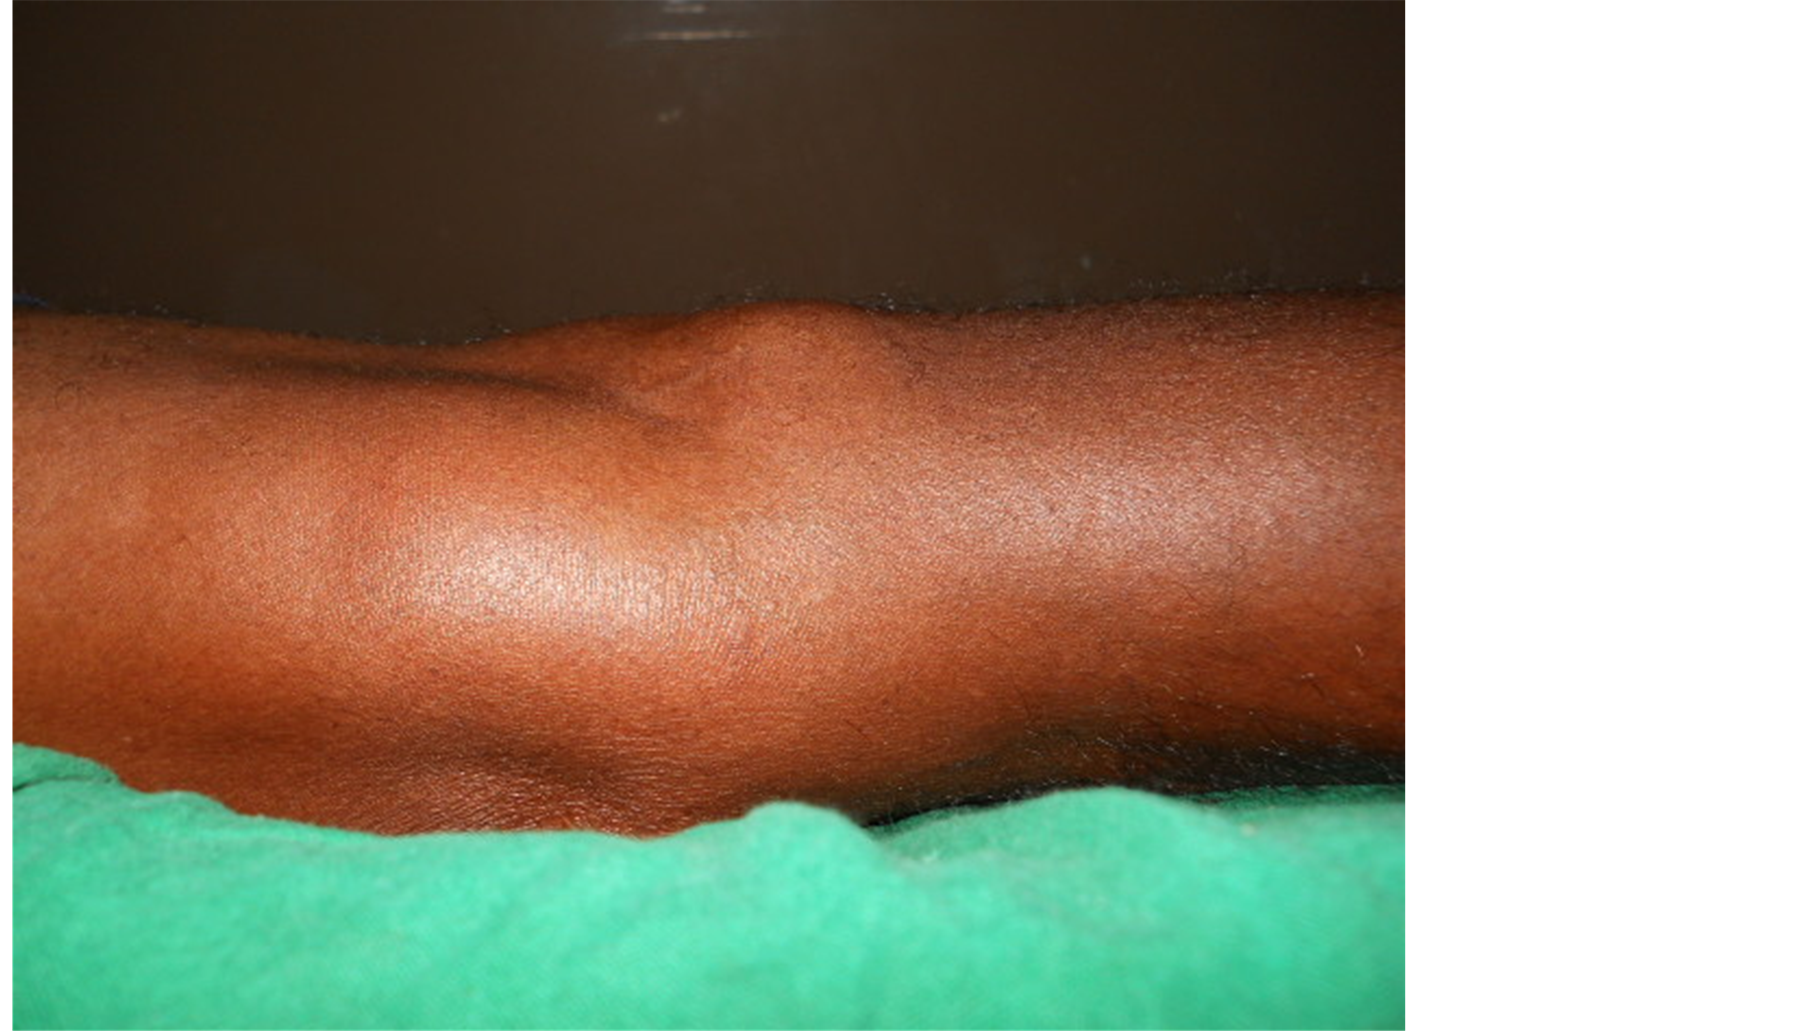 Tuberculous Arthritis Of Knee Presenting As Bakers Cyst A Case Report